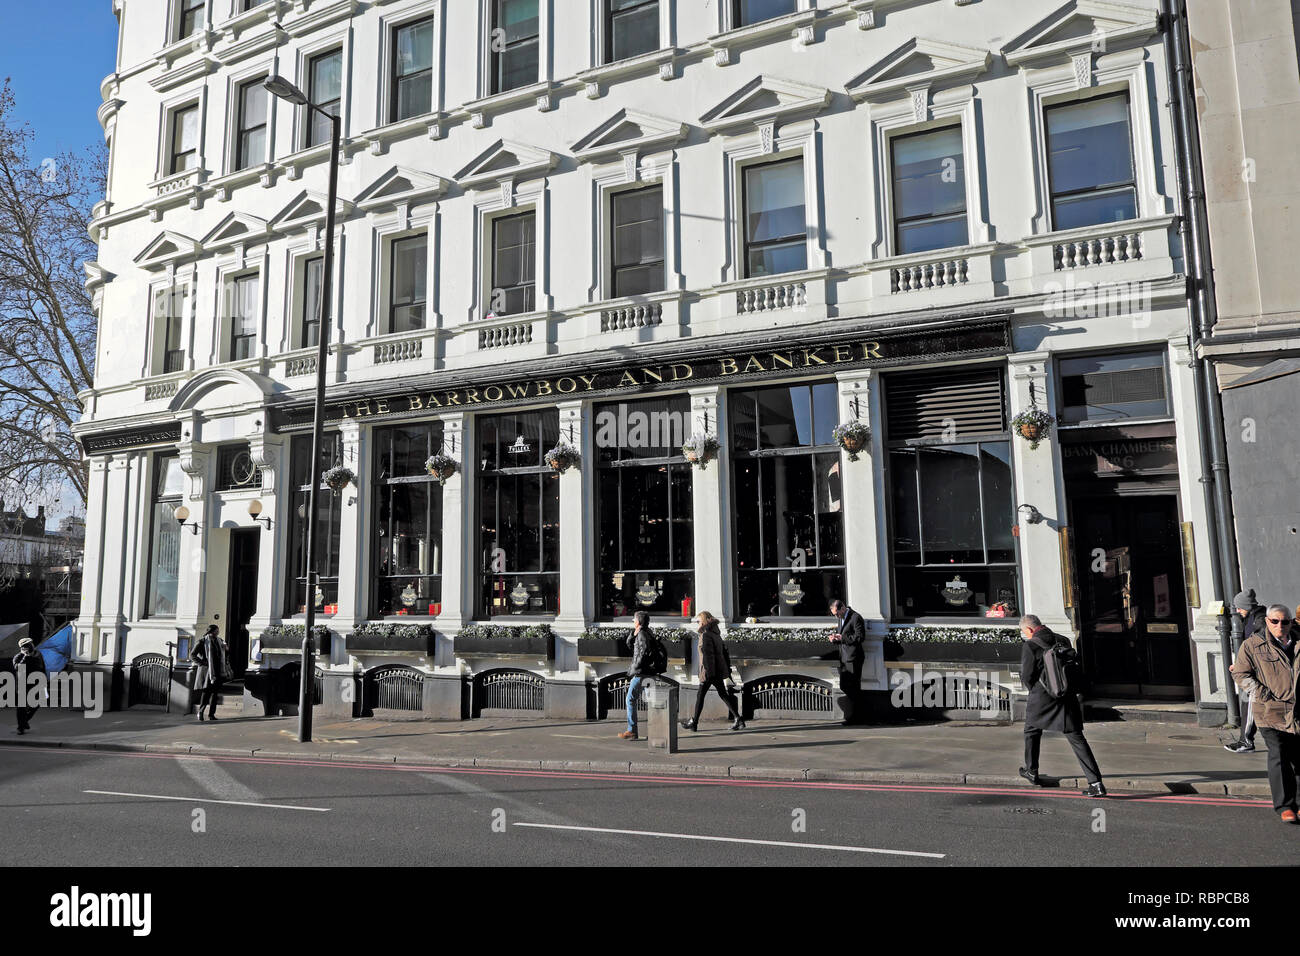 The Barrowboy and Banker pub exterior view on Borough High Street in Southwark, South London UK  KATHY DEWITT Stock Photo